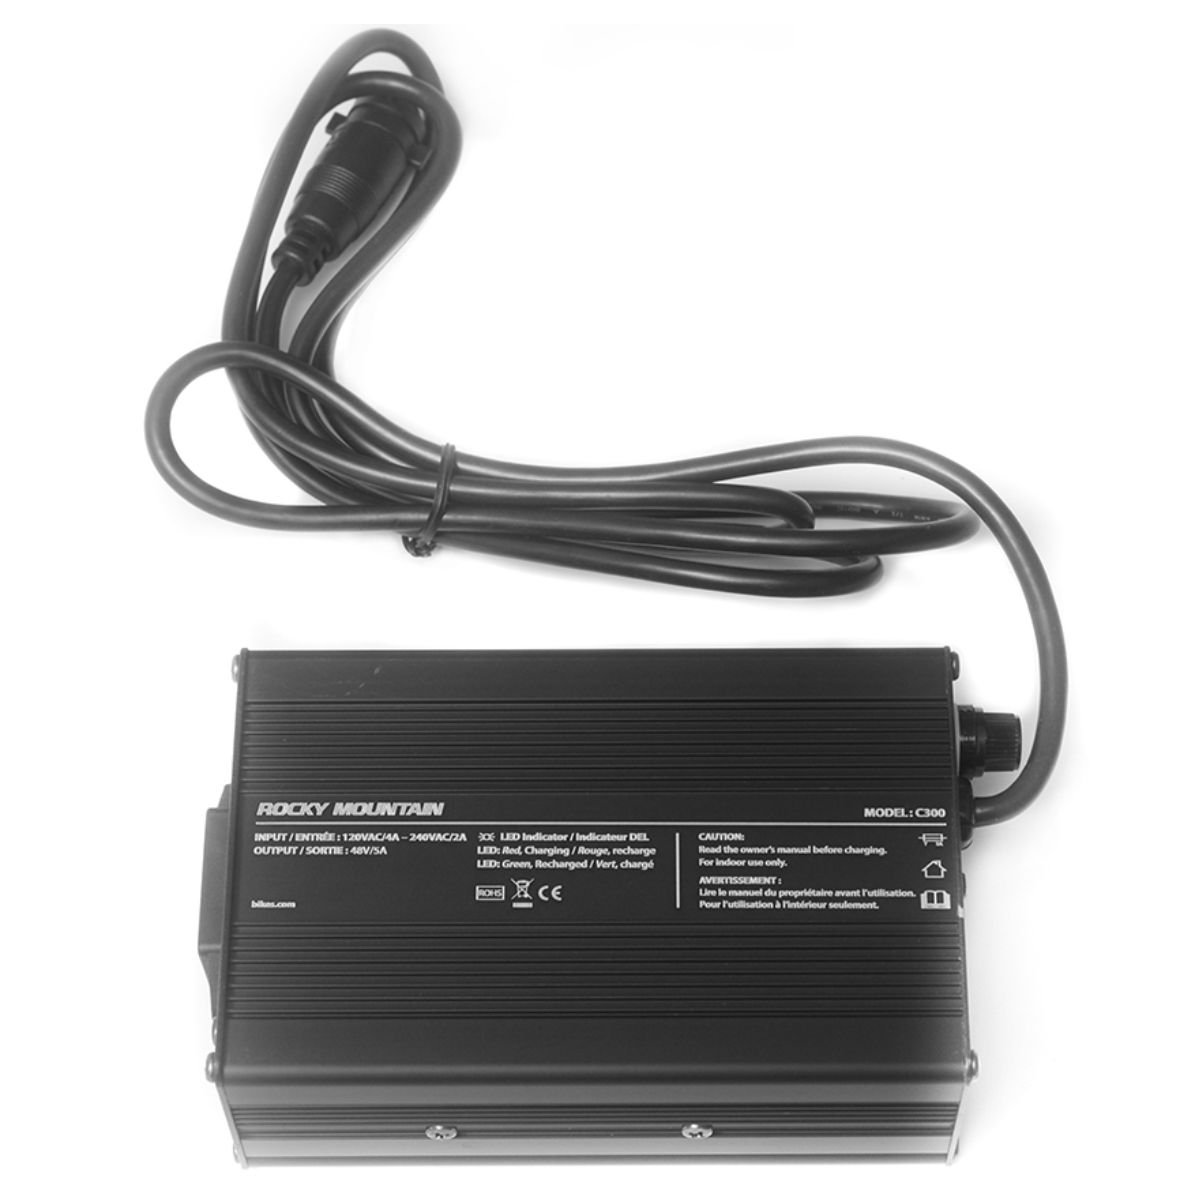 Charger for Rocky Mountain Powerplay 120V 54V/5A